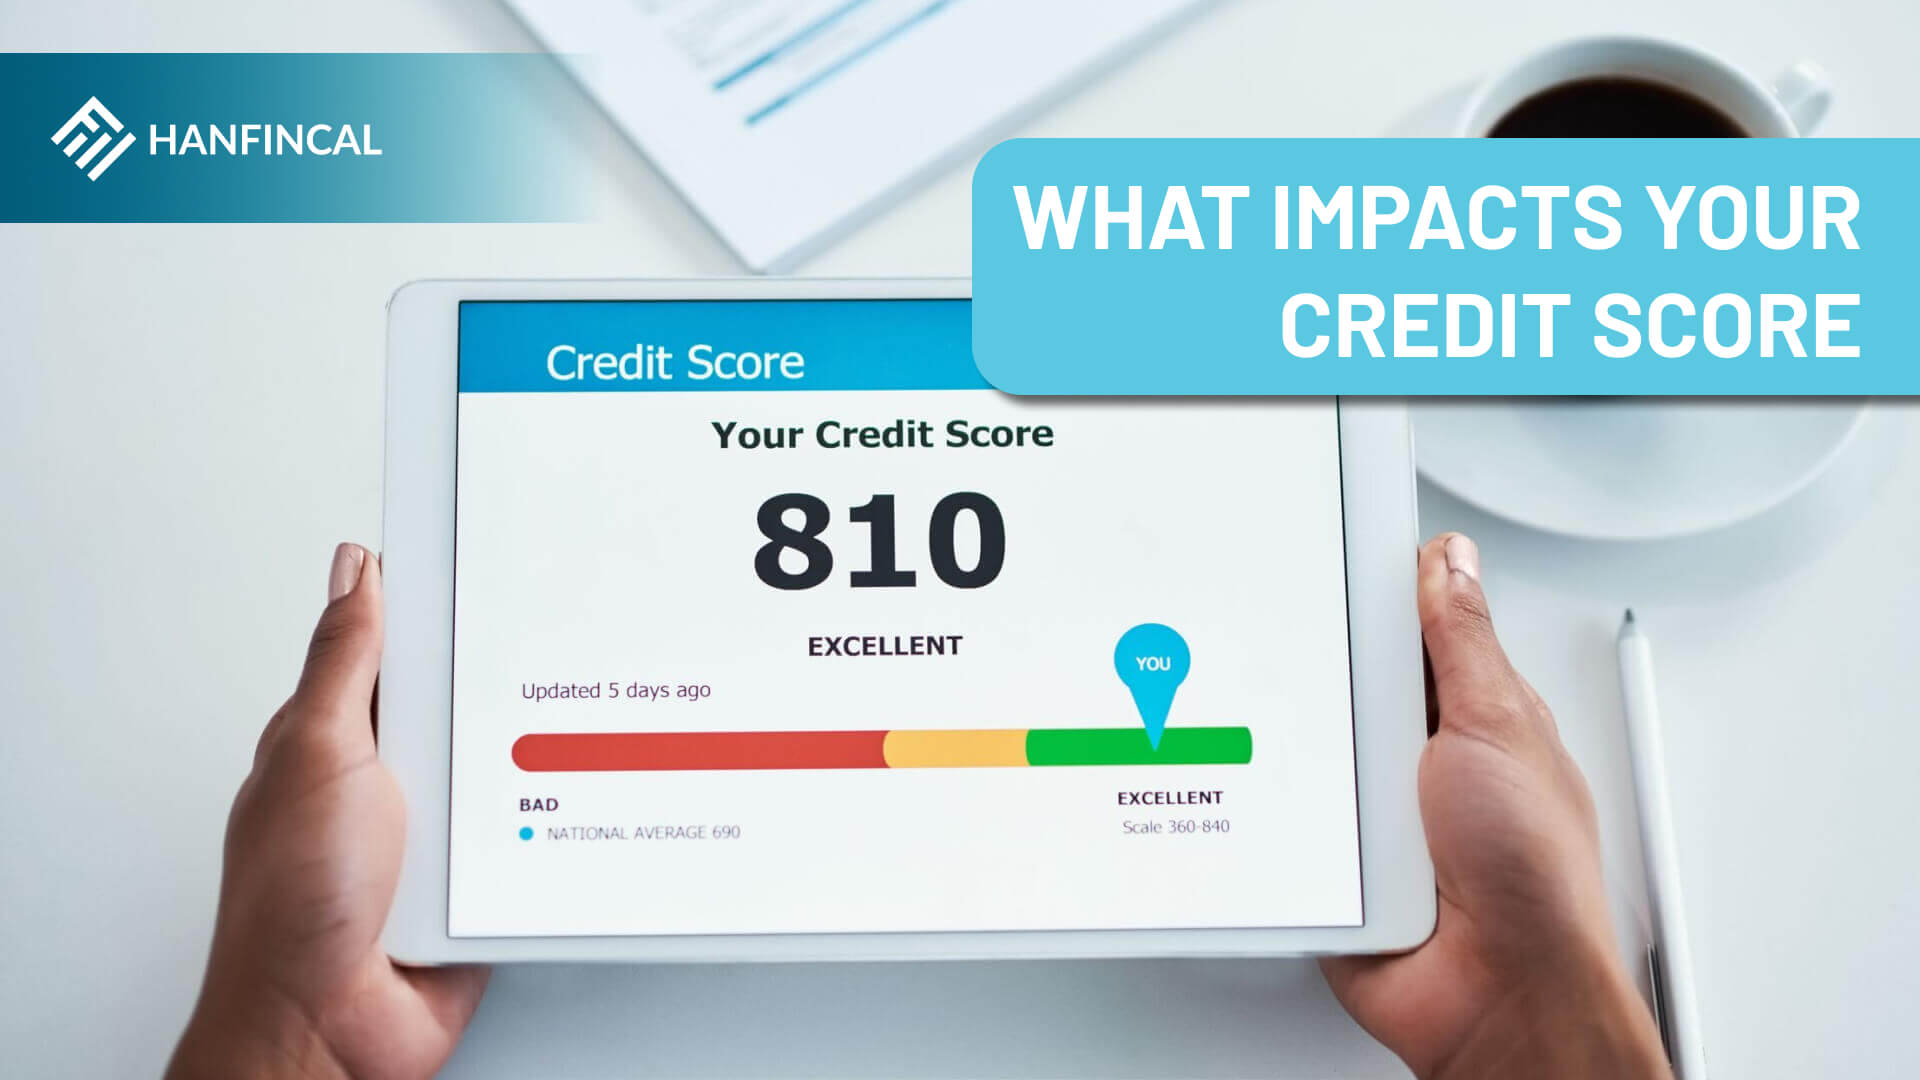 What impacts your credit score?